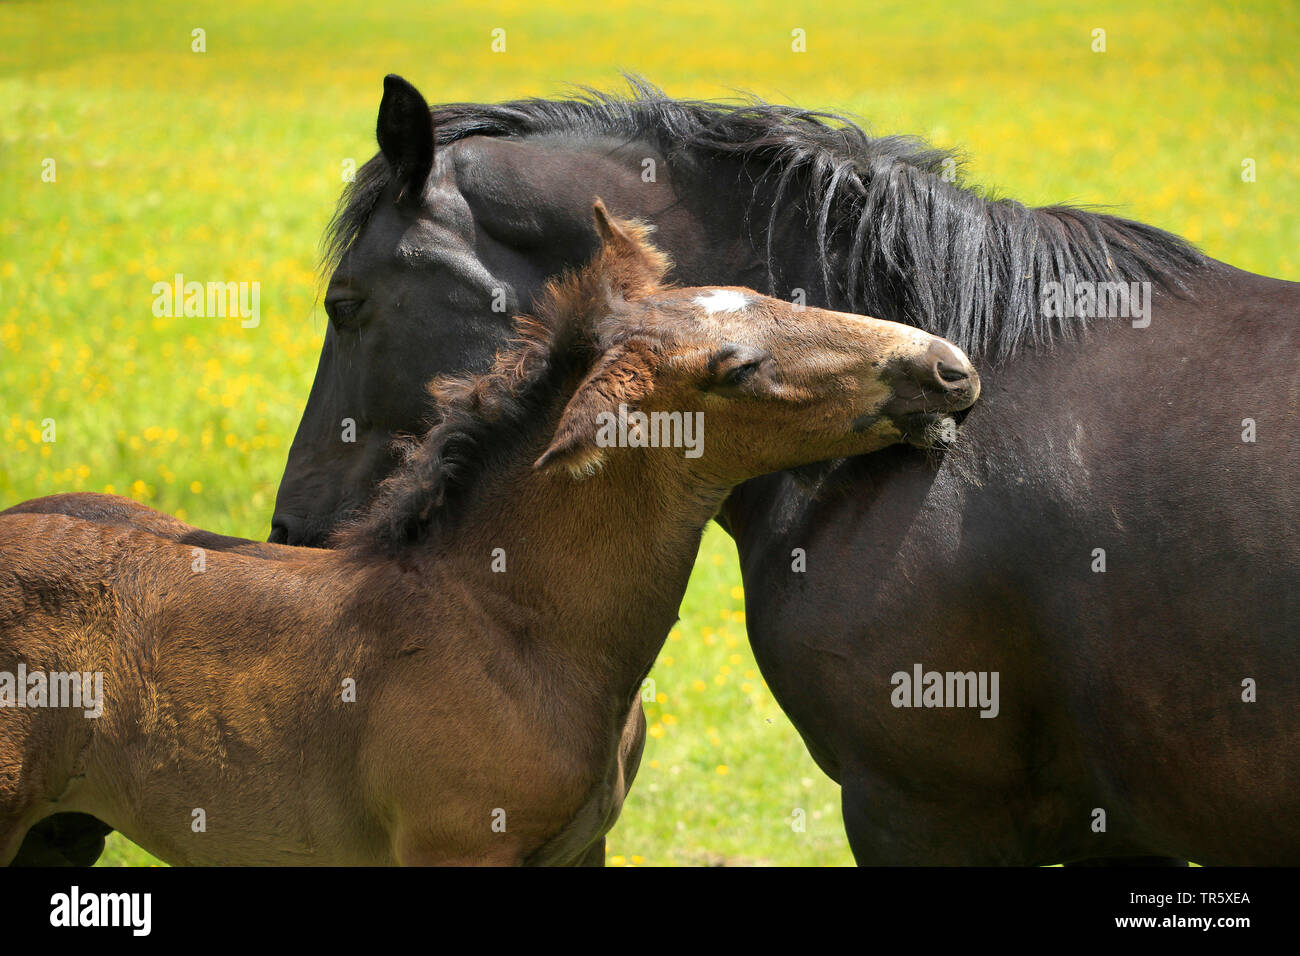 domestic horse (Equus przewalskii f. caballus), foal cuddling with mare on a pasture, side view, Germany Stock Photo